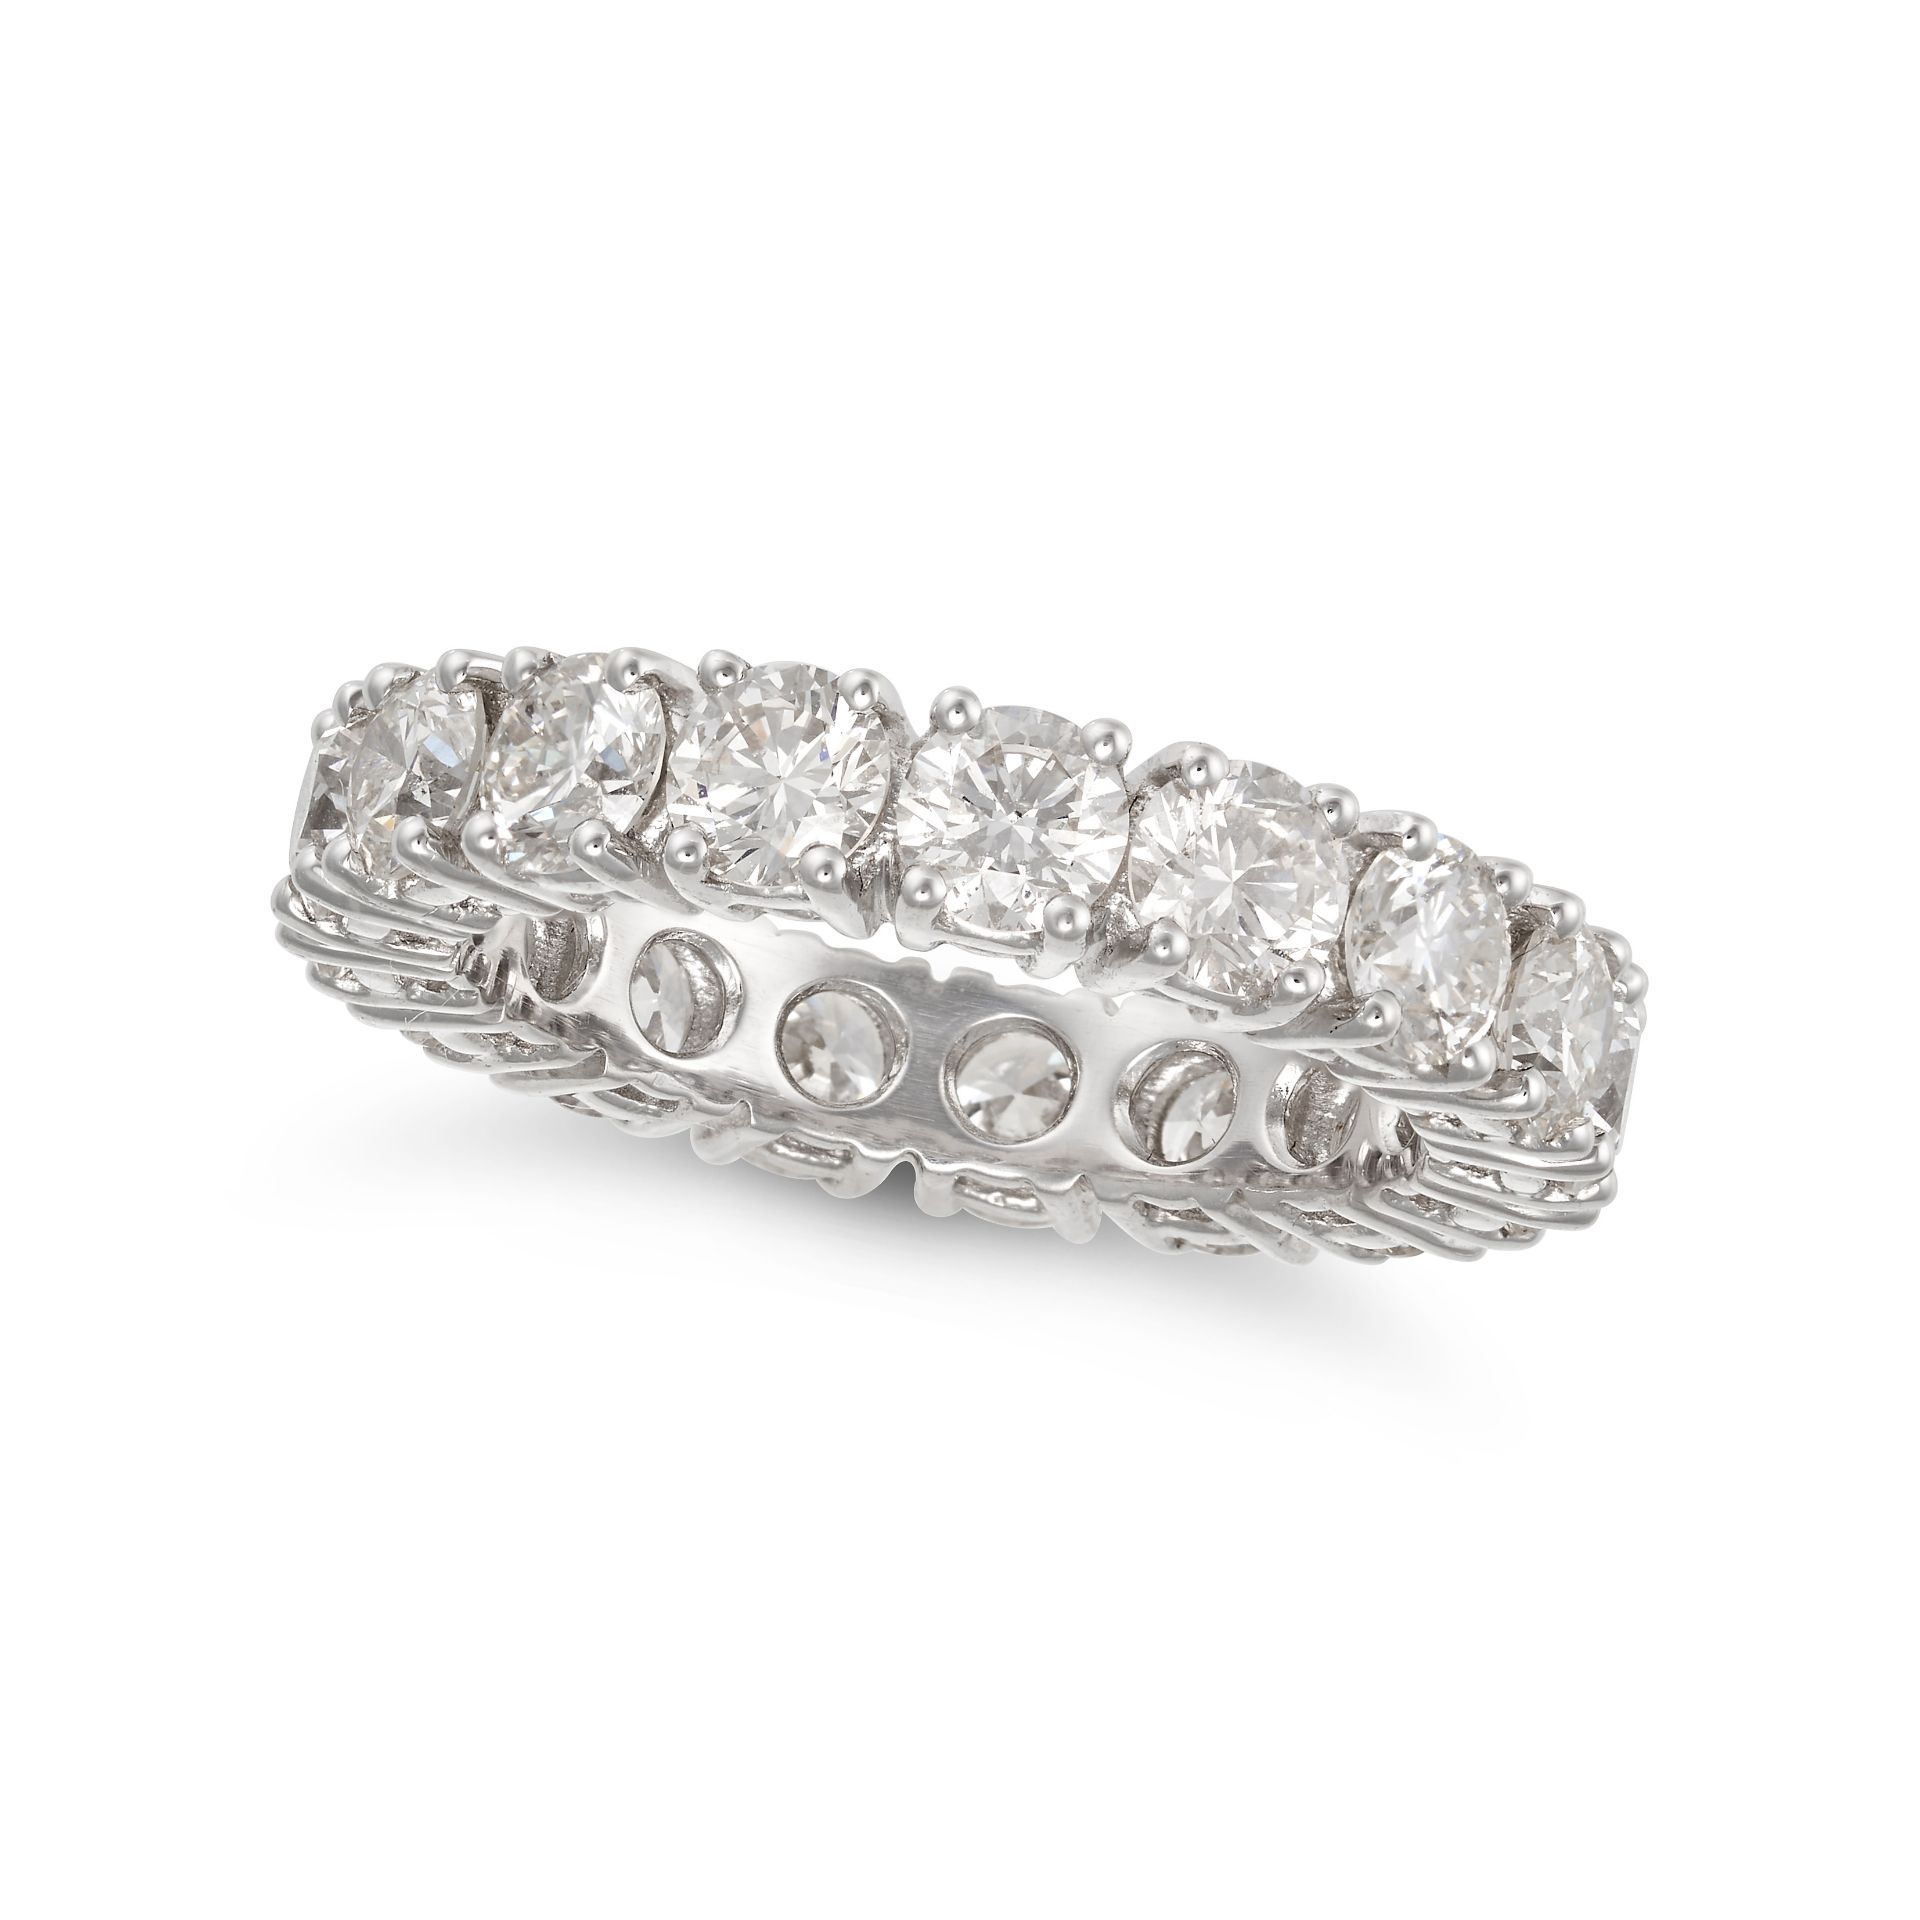 A DIAMOND FULL ETERNITY RING in 18ct white gold, sell all around with a row of round brilliant cu...